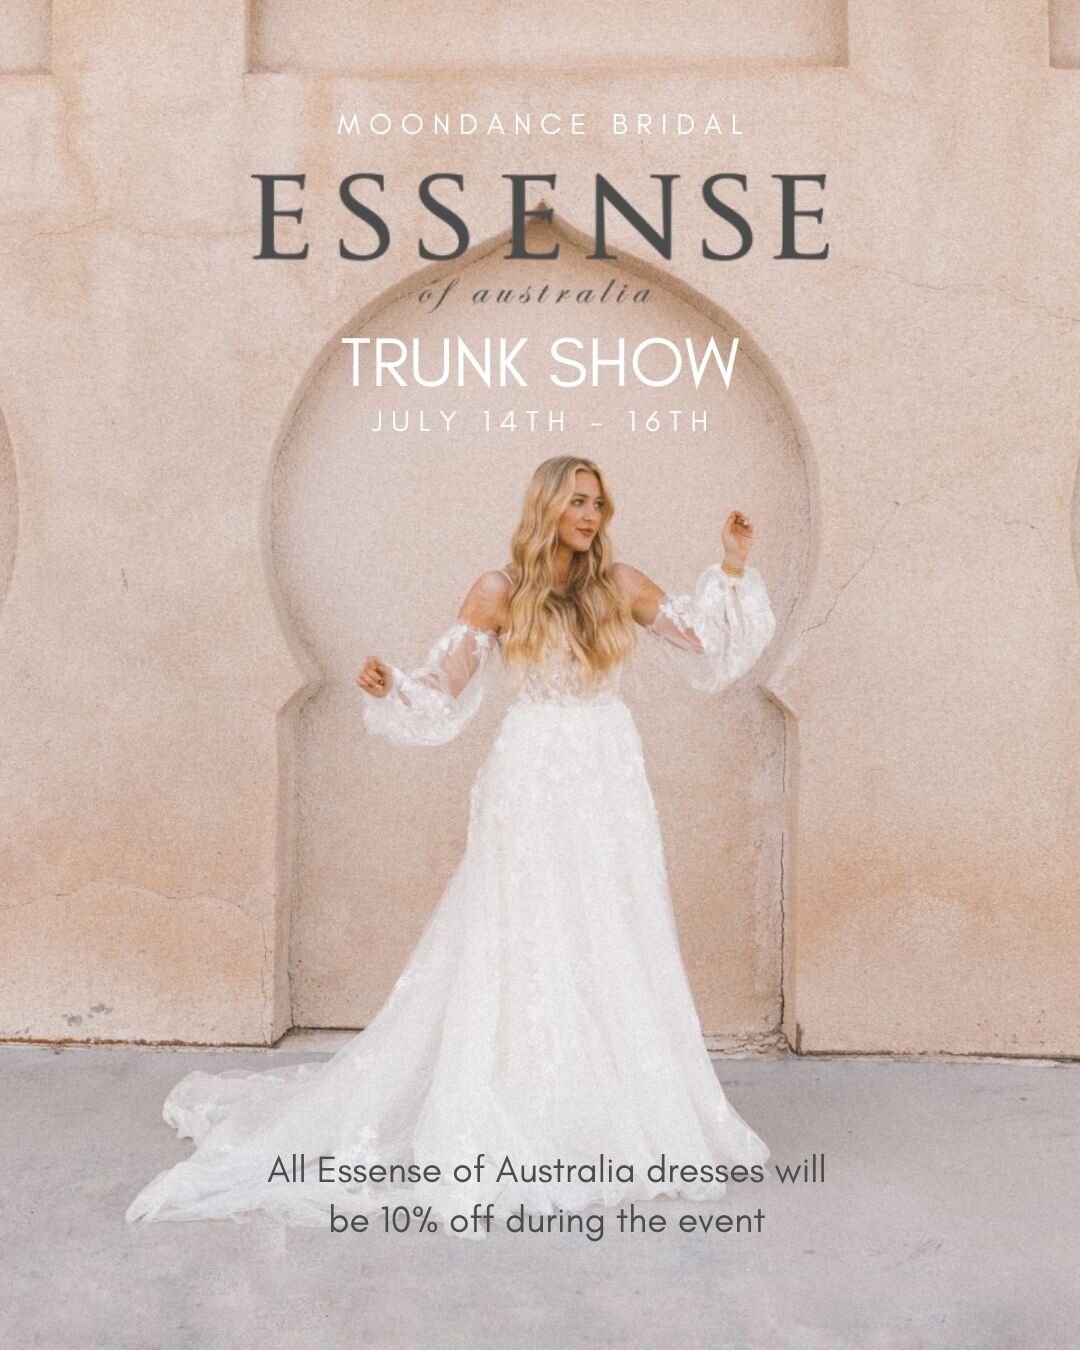 Join us for our @essenseofaustralia Trunk Show next weekend!⁠
⁠
The details: ⁠
When - July 14th - July 16th⁠
What - 10% off retail price Essense Gowns, and heavily discounted samples⁠
Where - Moondance Bridal, 1880 Santa Barbara Ave, Suite 130, San L